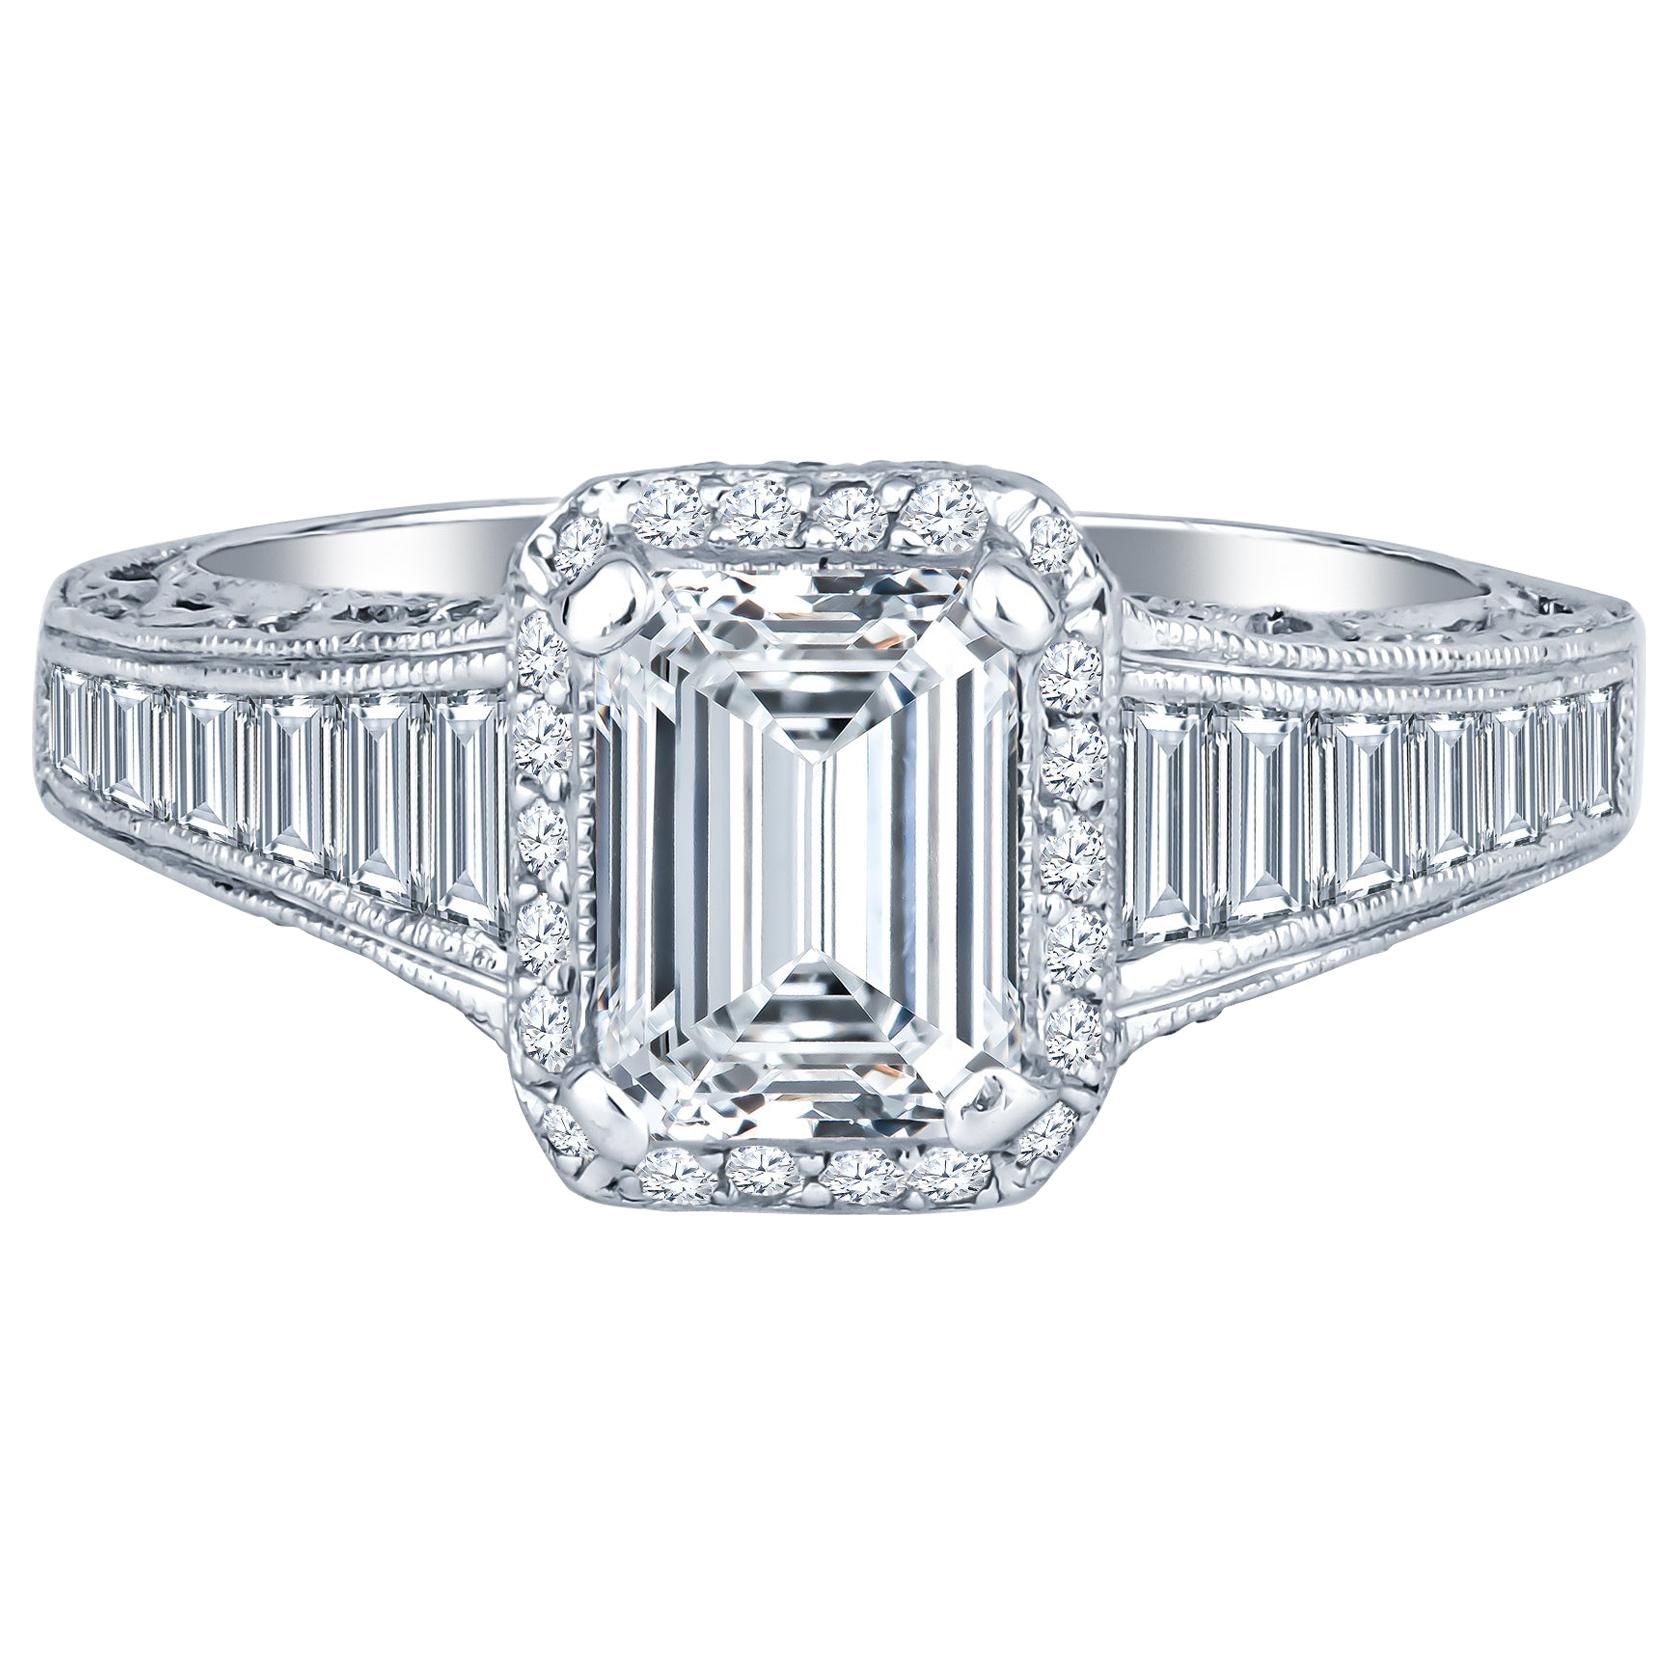 Tacori 1.01 Emerald Cut Ring with 1.35 Carat in Side Diamond, GIA Certified For Sale